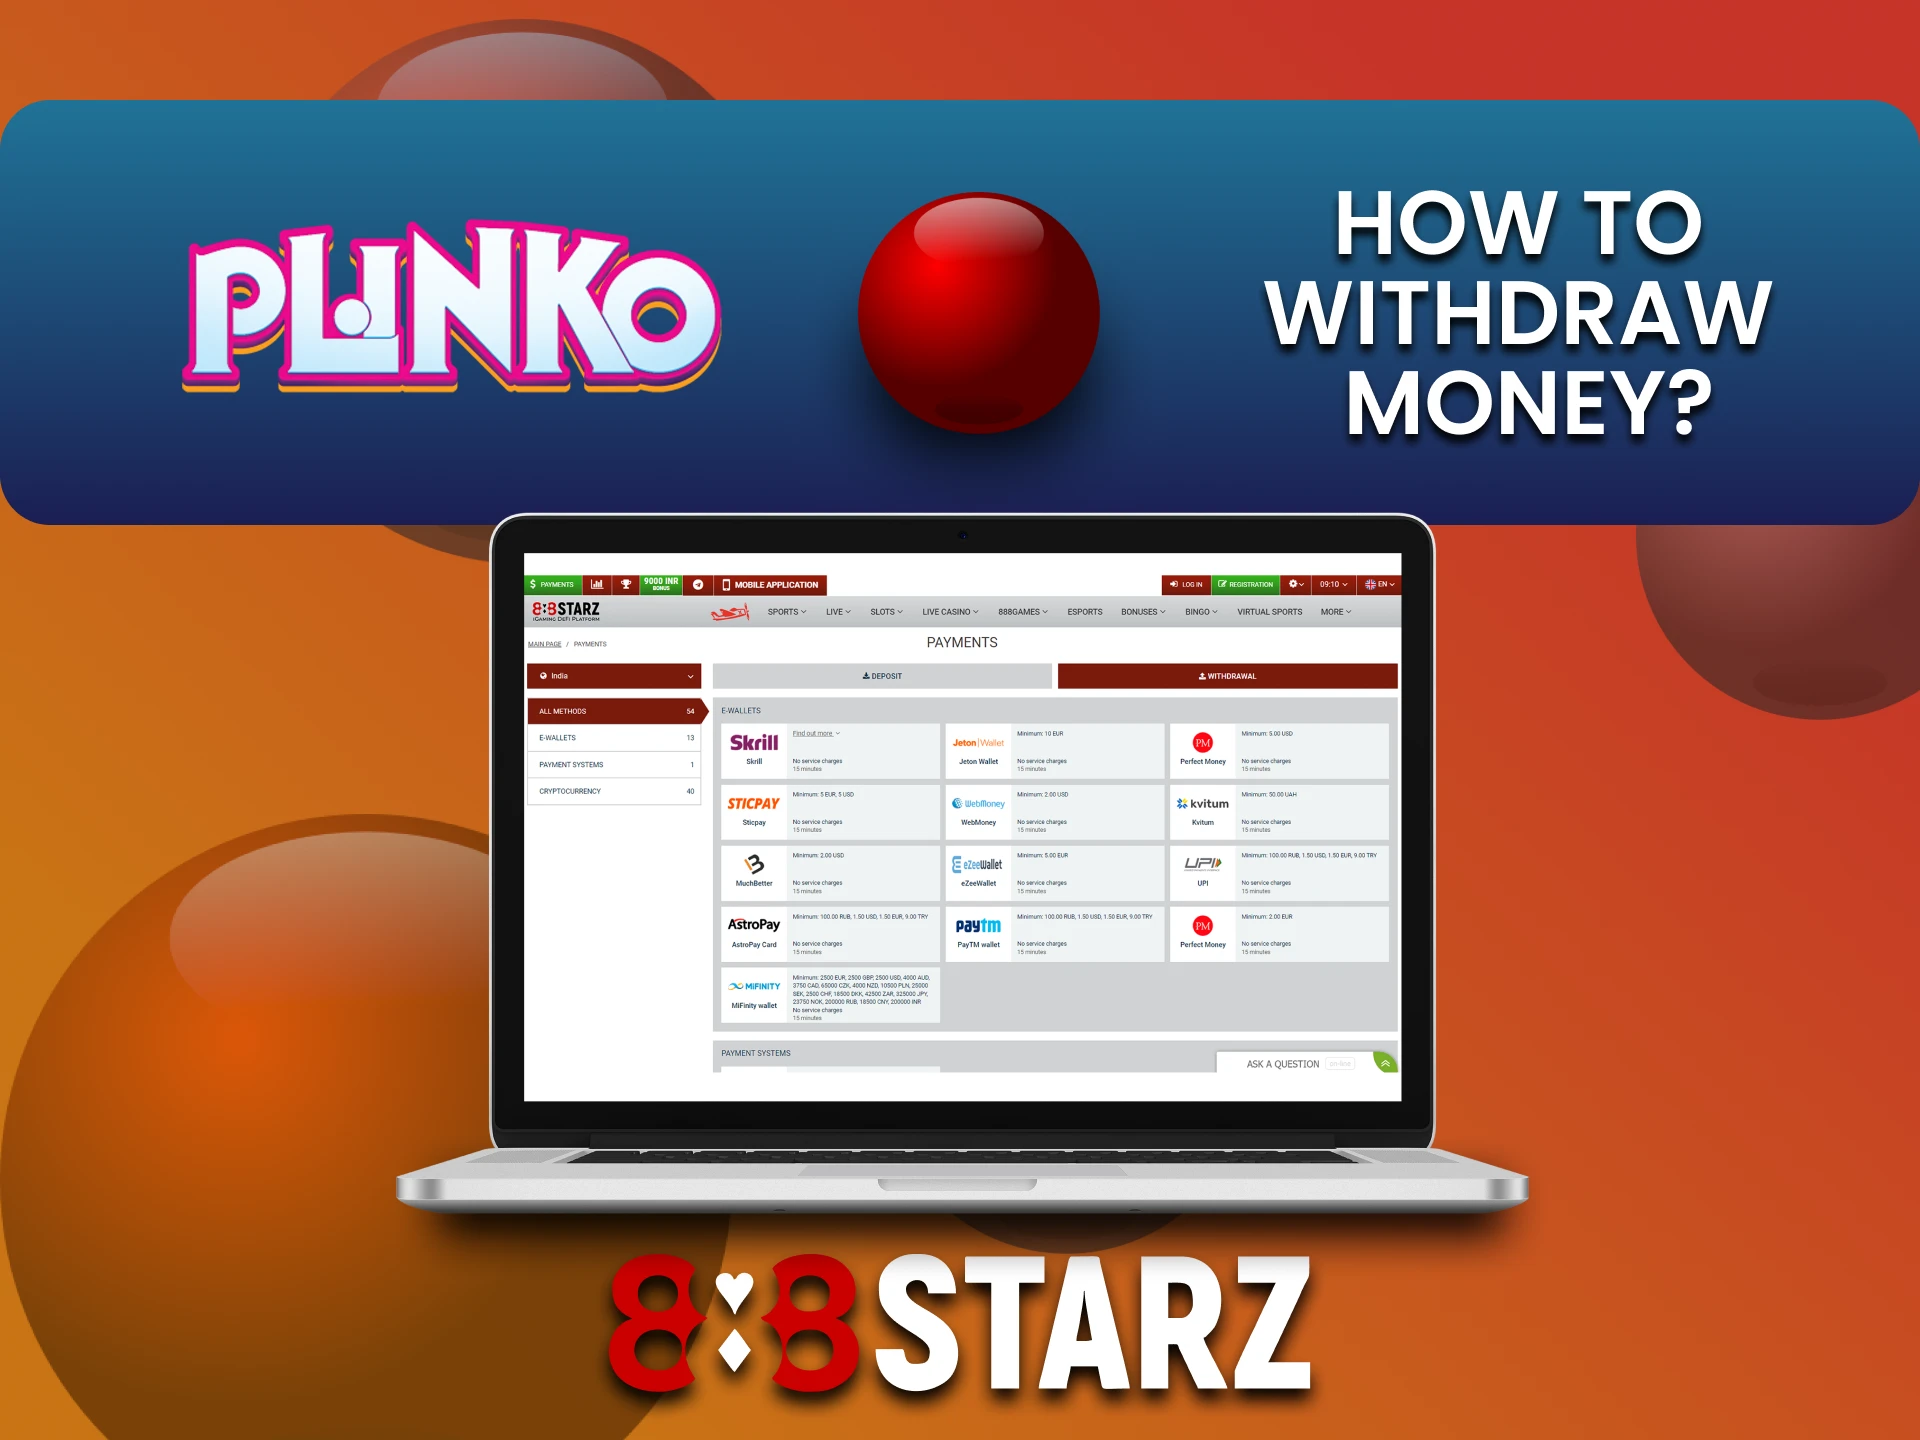 Find out how to withdraw funds at 888starz for Plinko.